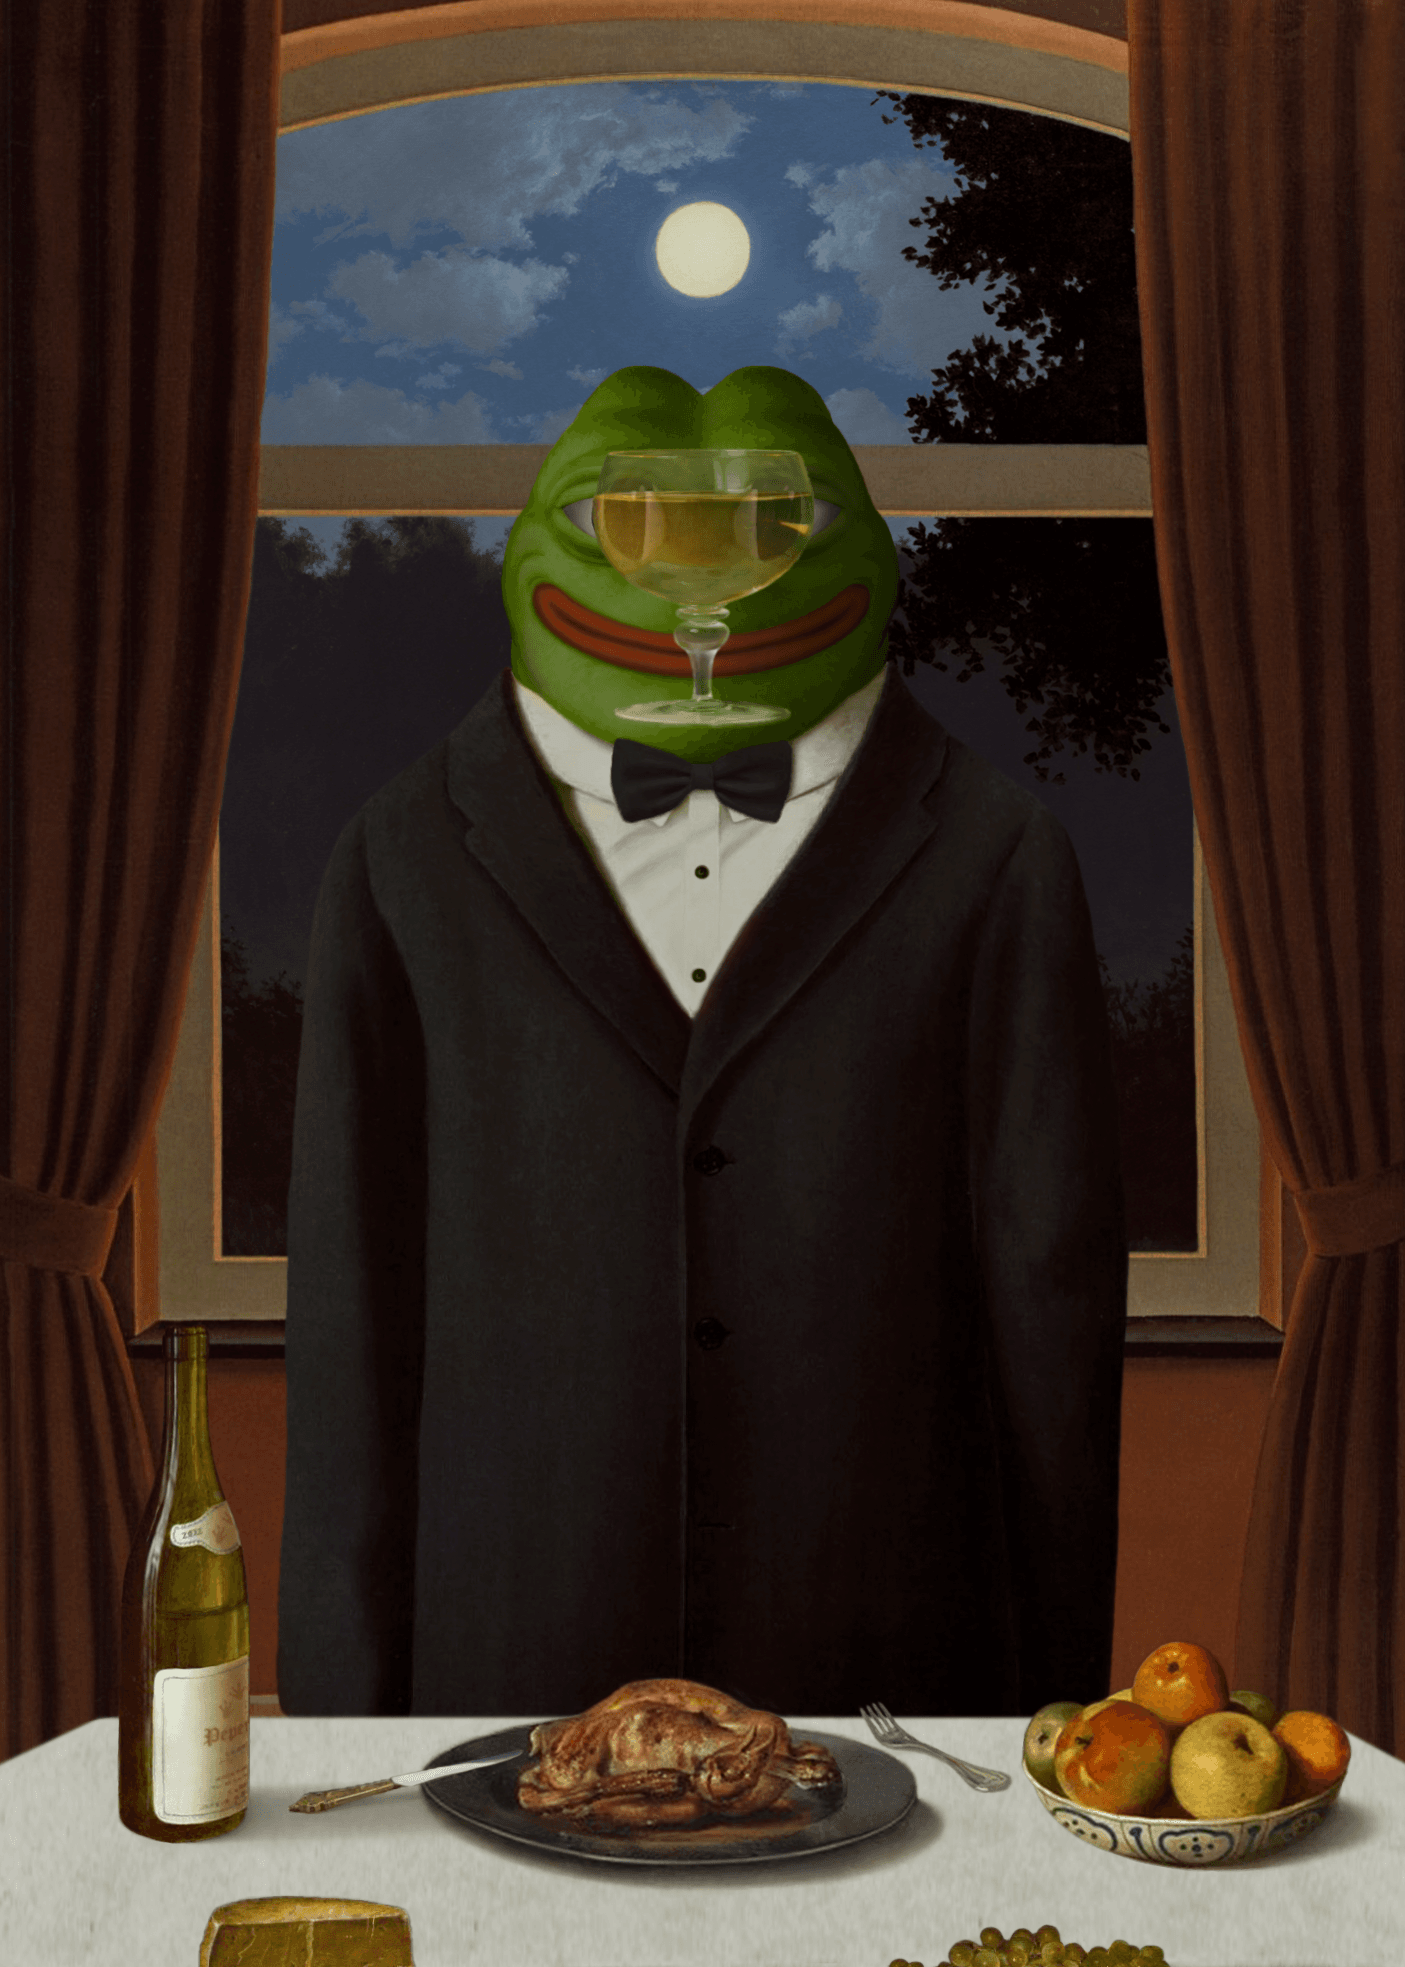 The Son of Pepe